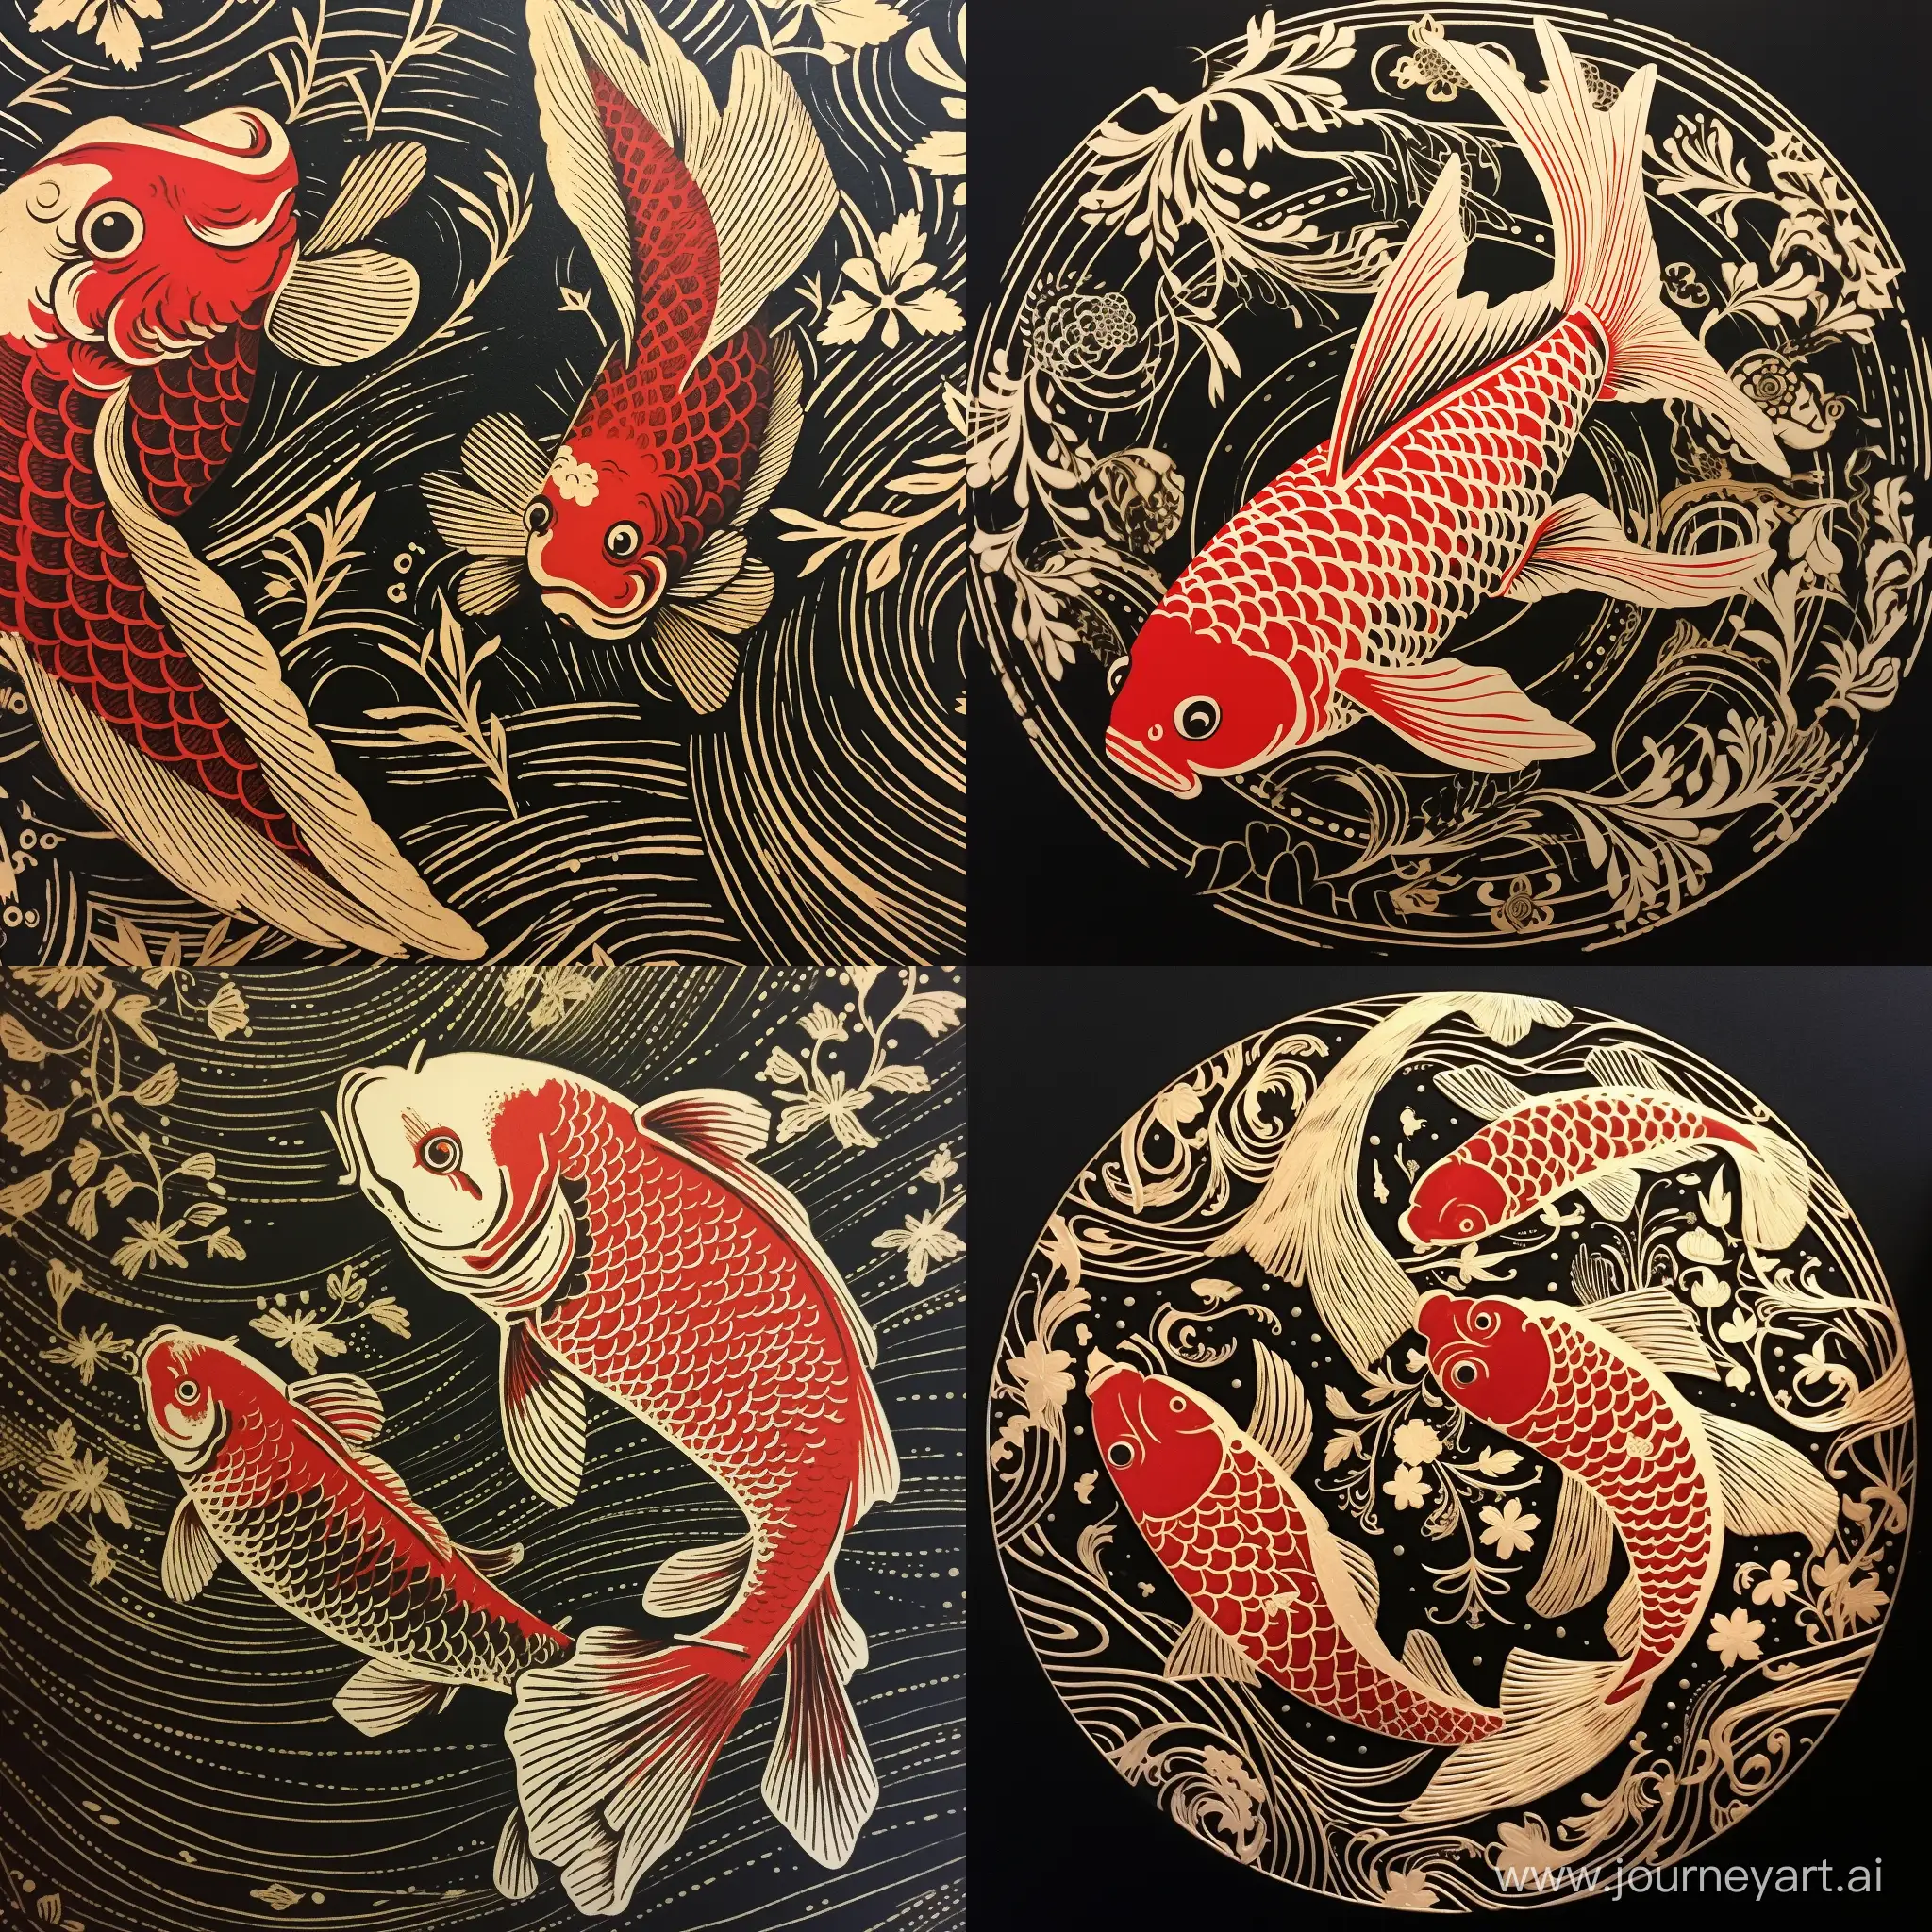 Japanese-Butterfly-Koi-Linocut-Print-with-Ornate-Patterns